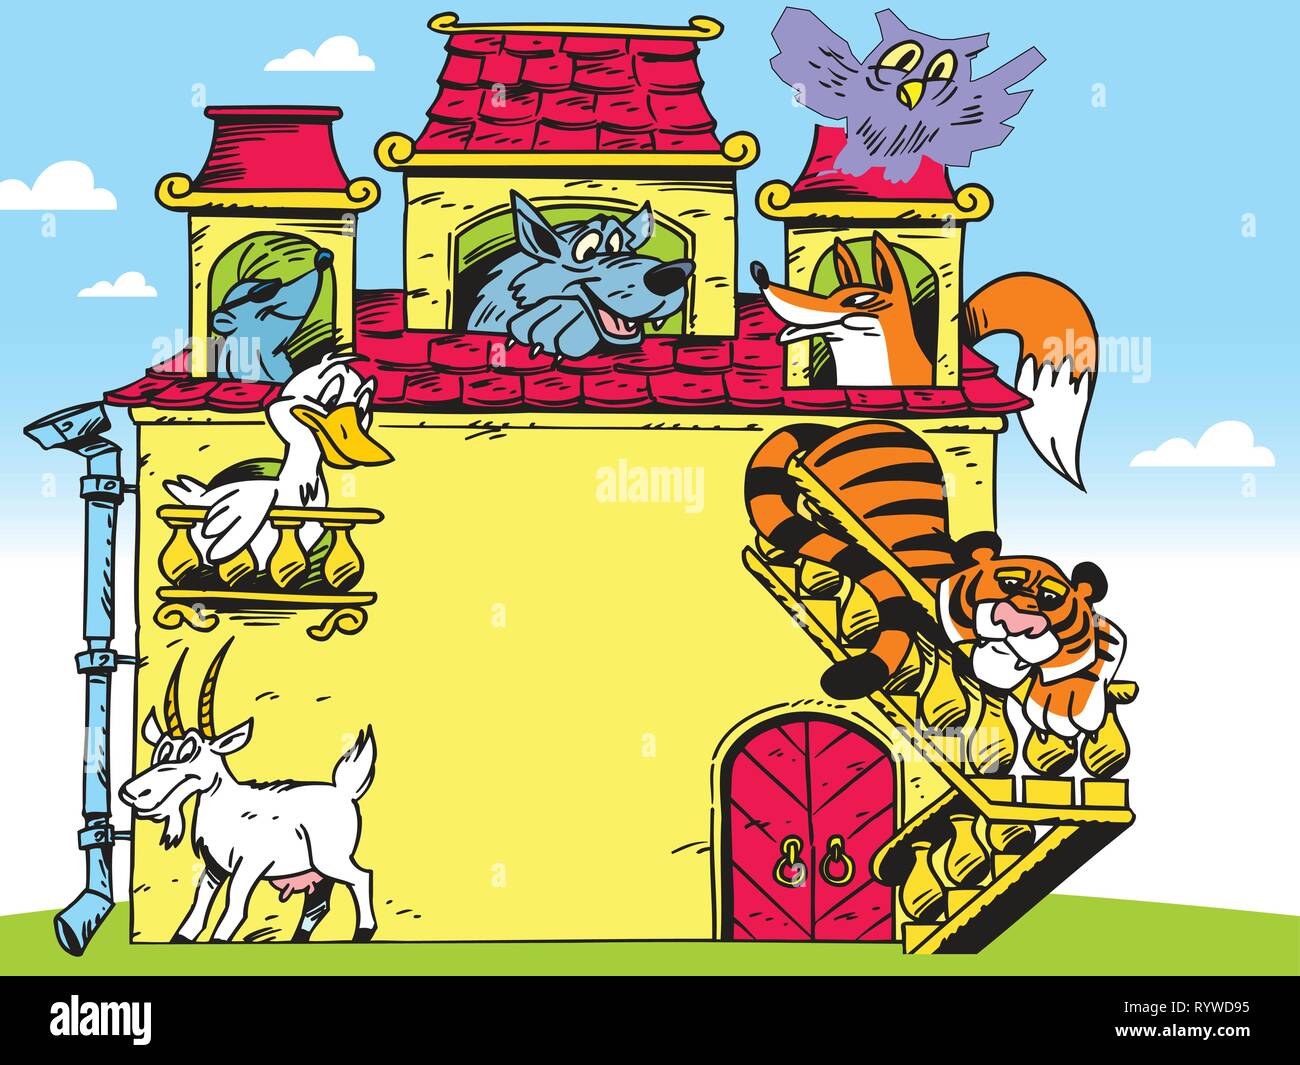 In the illustration cartoon house with funny animals. Stock Vector